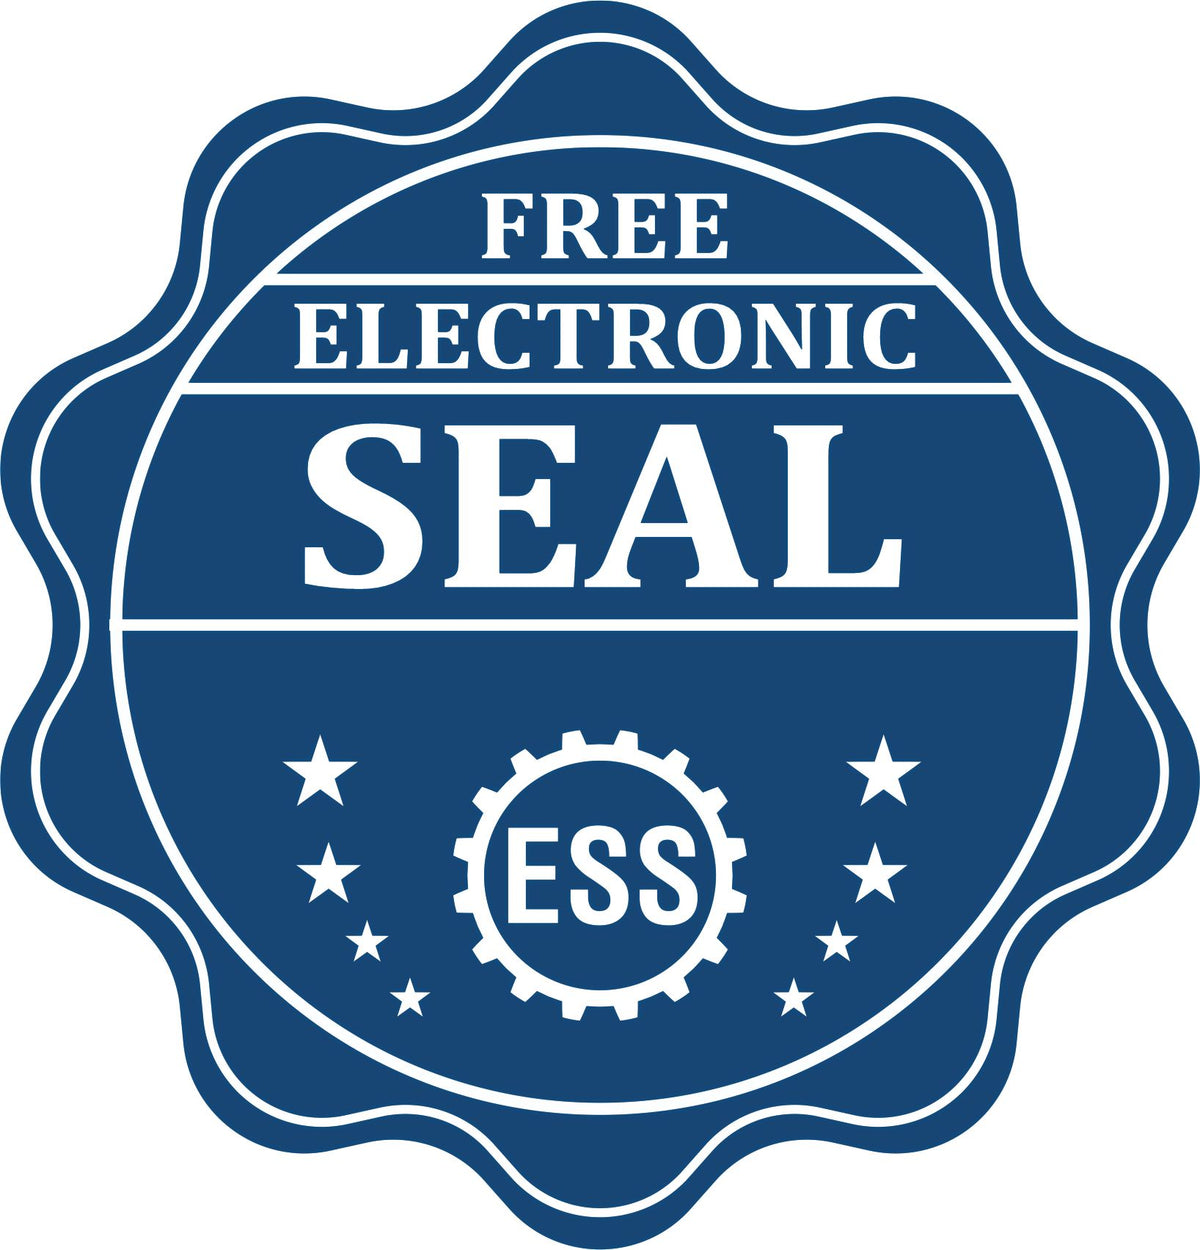 A badge showing a free electronic seal for the Heavy-Duty Massachusetts Rectangular Notary Stamp with stars and the ESS gear on the emblem.